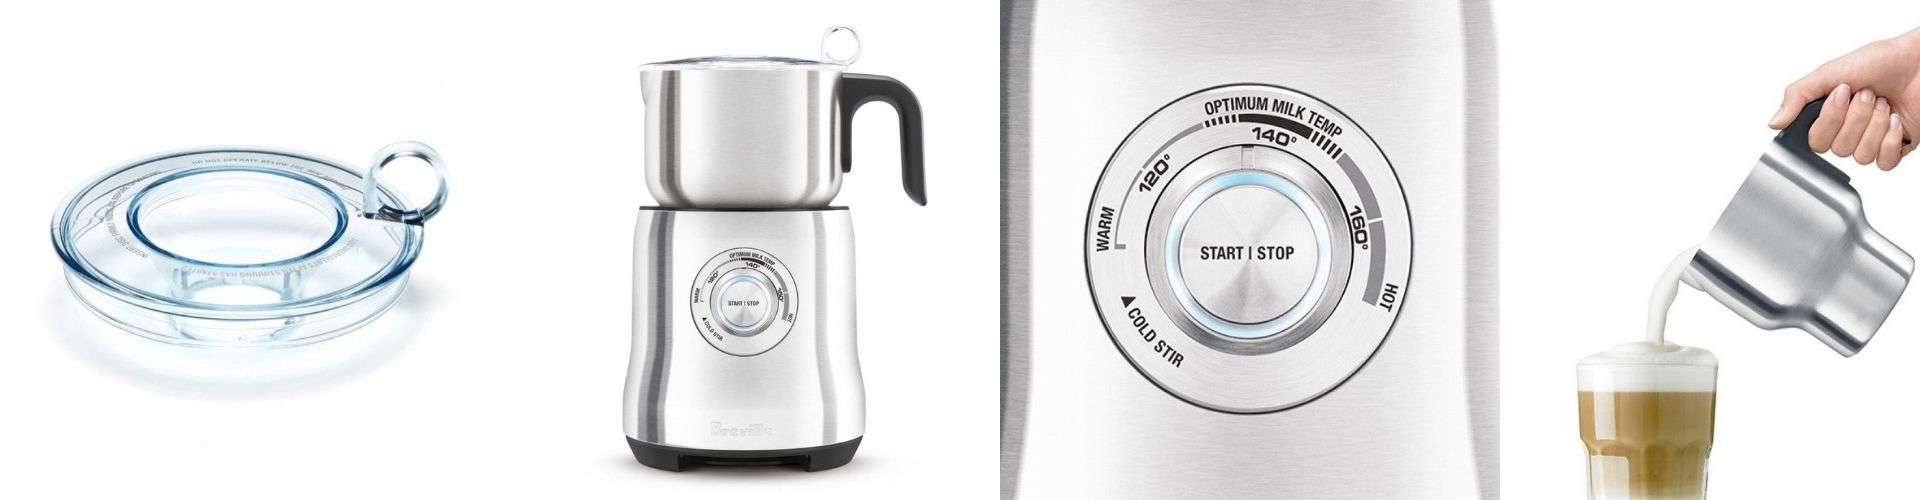 Breville Milk Cafe: The Ultimate Milk Frother